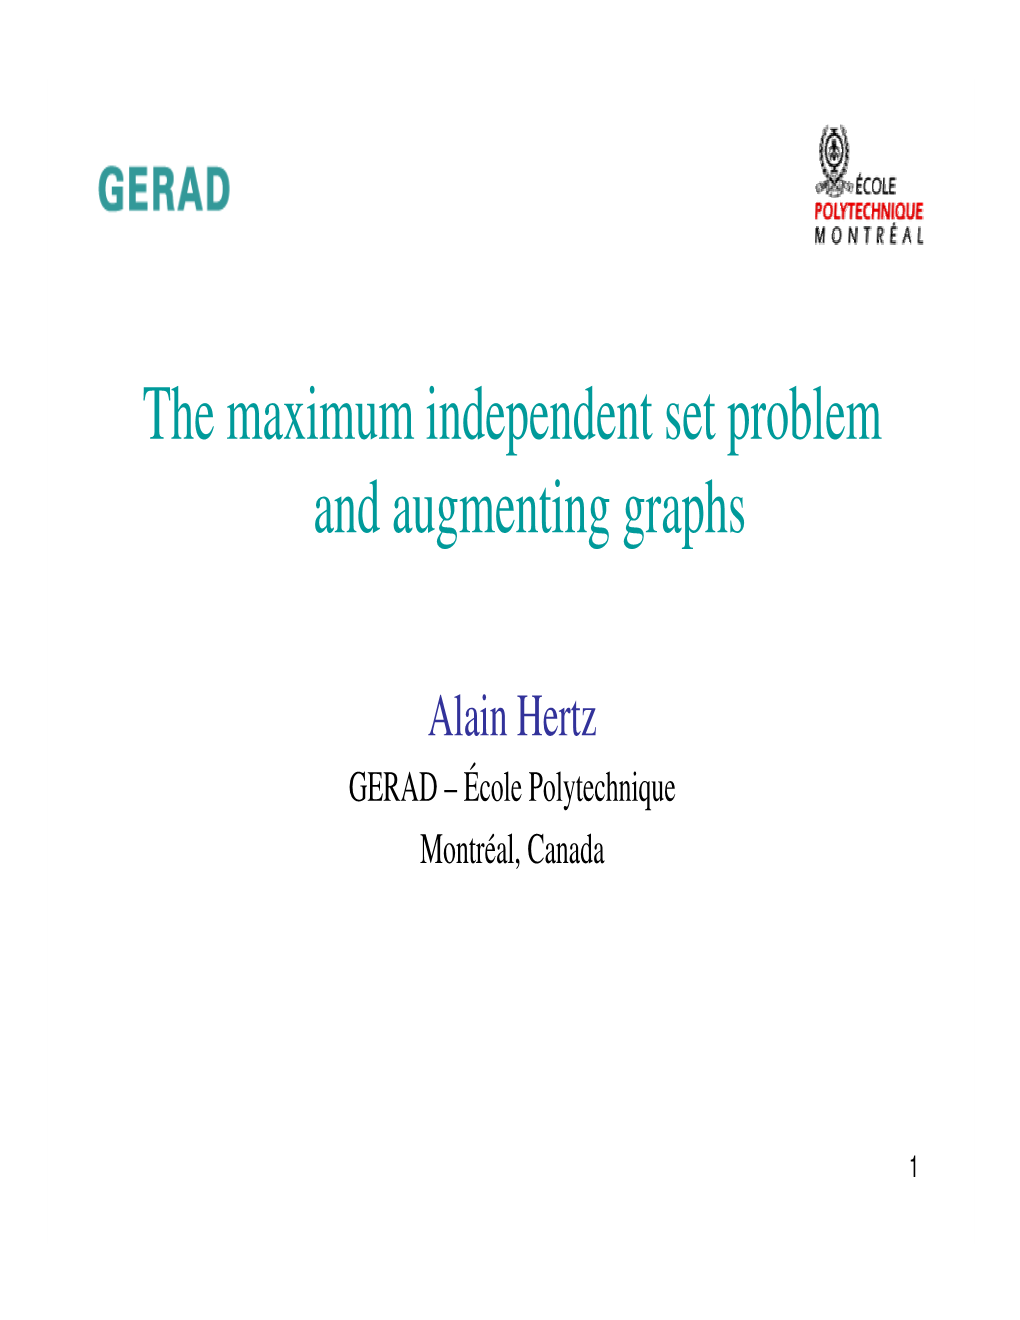 The Maximum Independent Set Problem and Augmenting Graphs